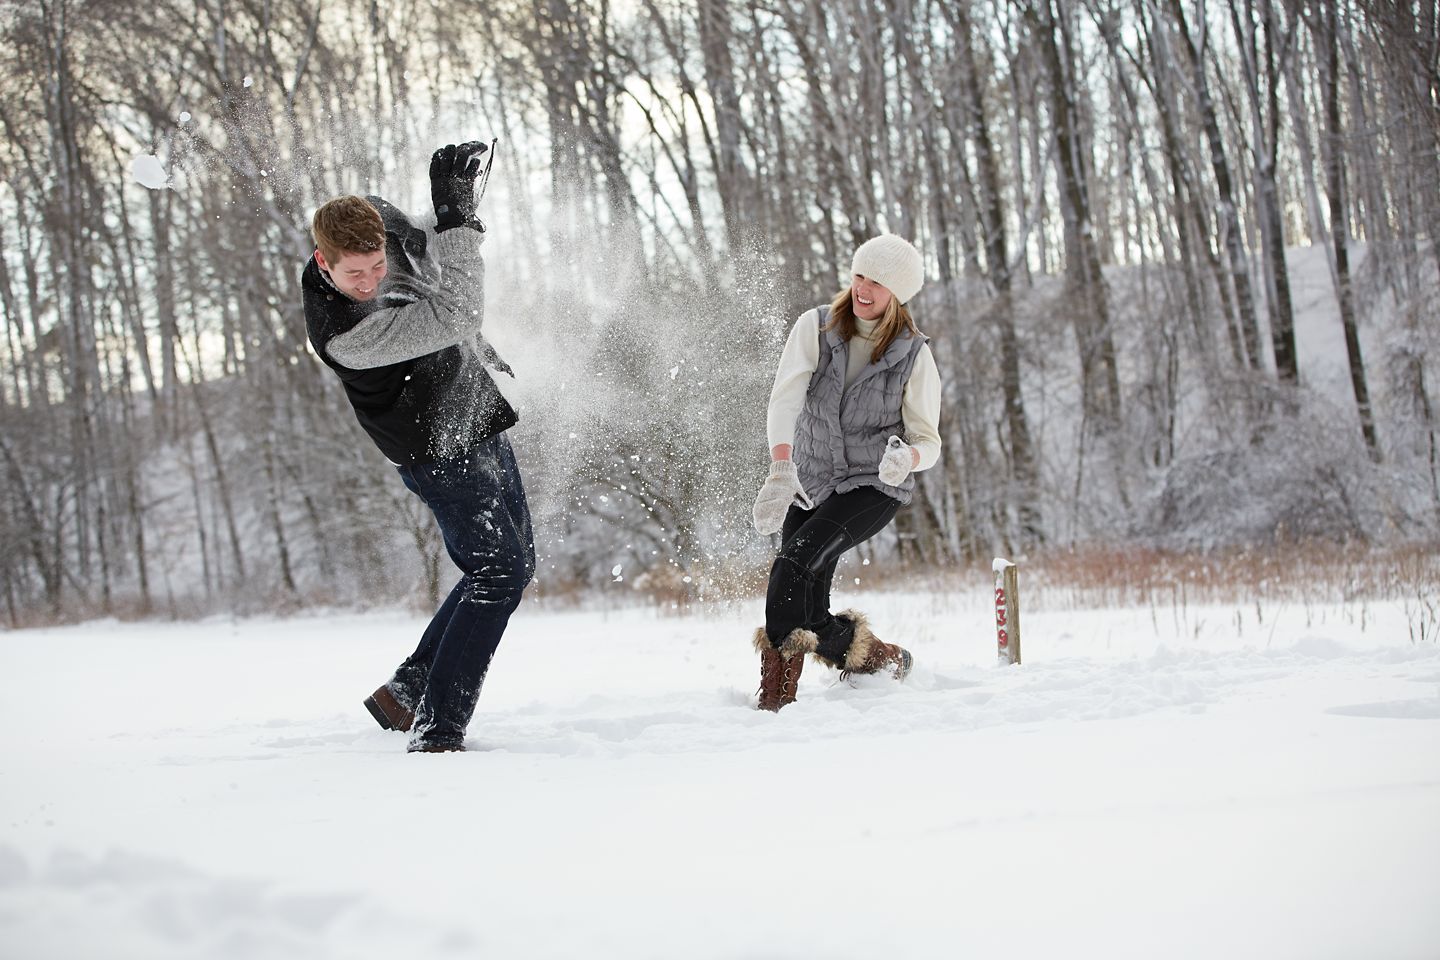 A man and a woman have a snowball fight in a snowy field in the winter